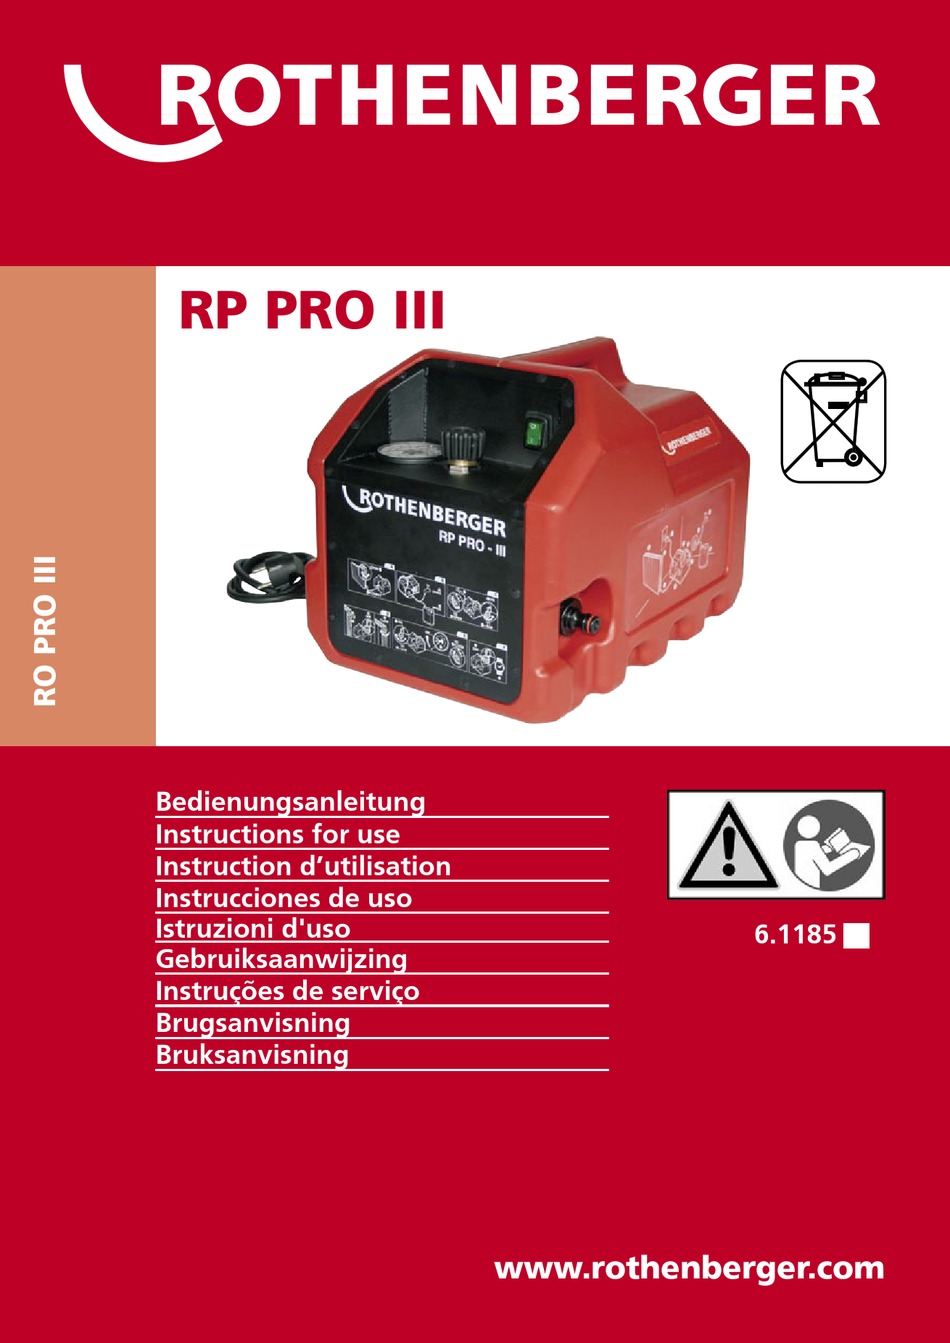 ROTHENBERGER RP PRO III INSTRUCTIONS FOR USE MANUAL Pdf Download .